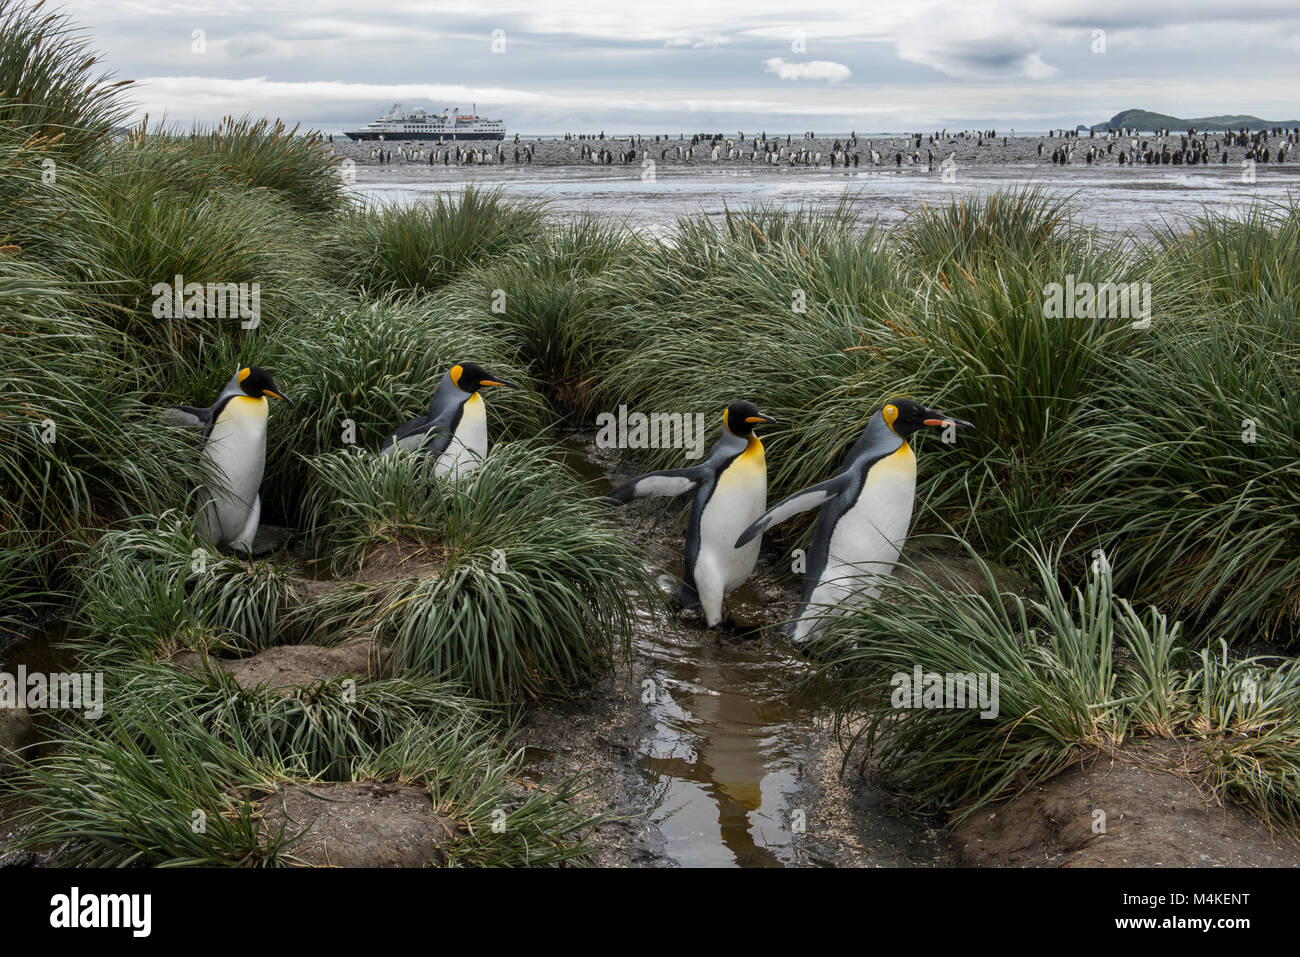 South Georgia, Salisbury Plain. King penguins in tussock grass habitat with Silversea expedition ship, Silver Explorer, in the distance. Stock Photo